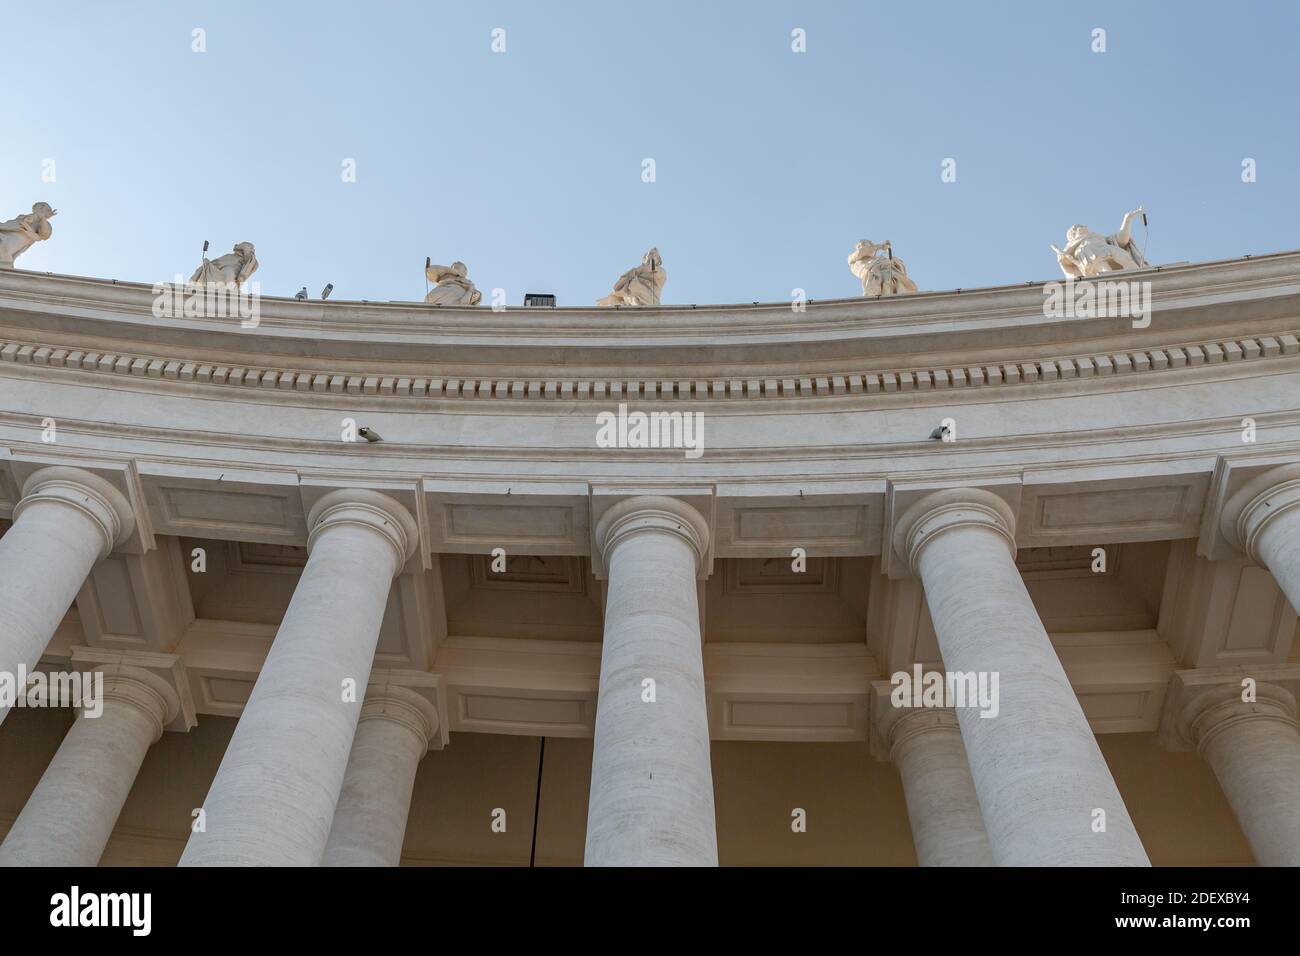 Statues Above the Colonnade of Saint Peter Basilica Stock Photo